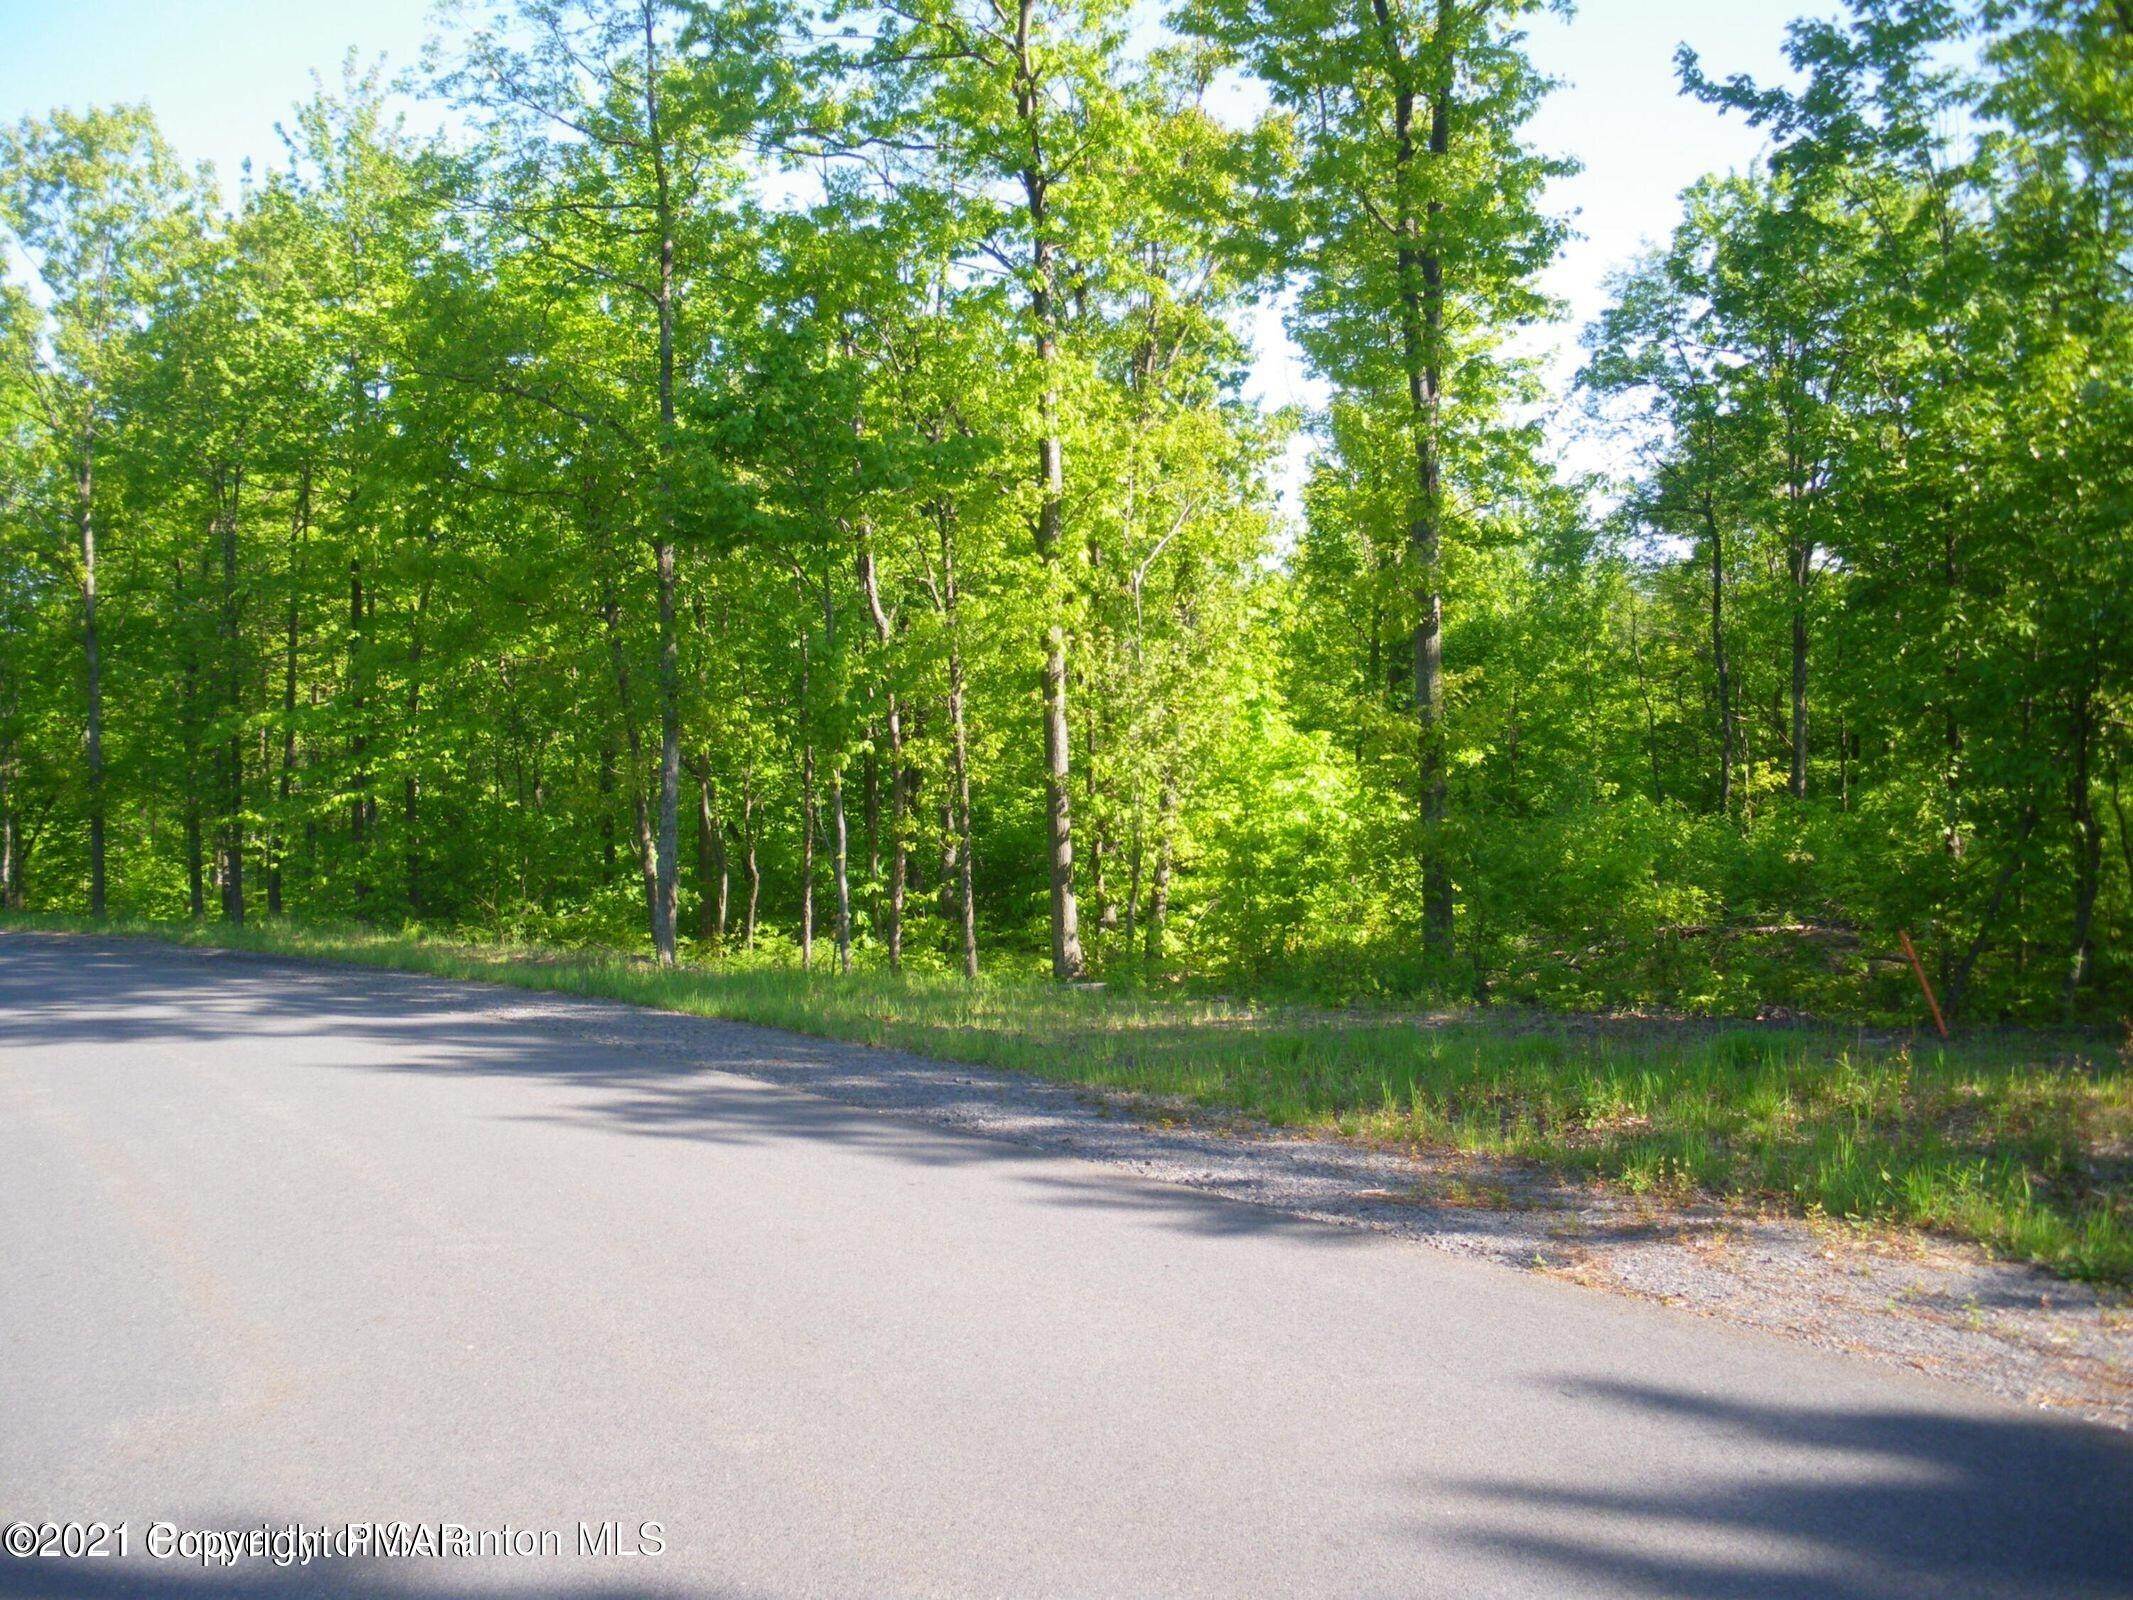 Land for Sale at 193 Highland L 193 Rd Roaring Brook Twp, Pennsylvania 18444 United States